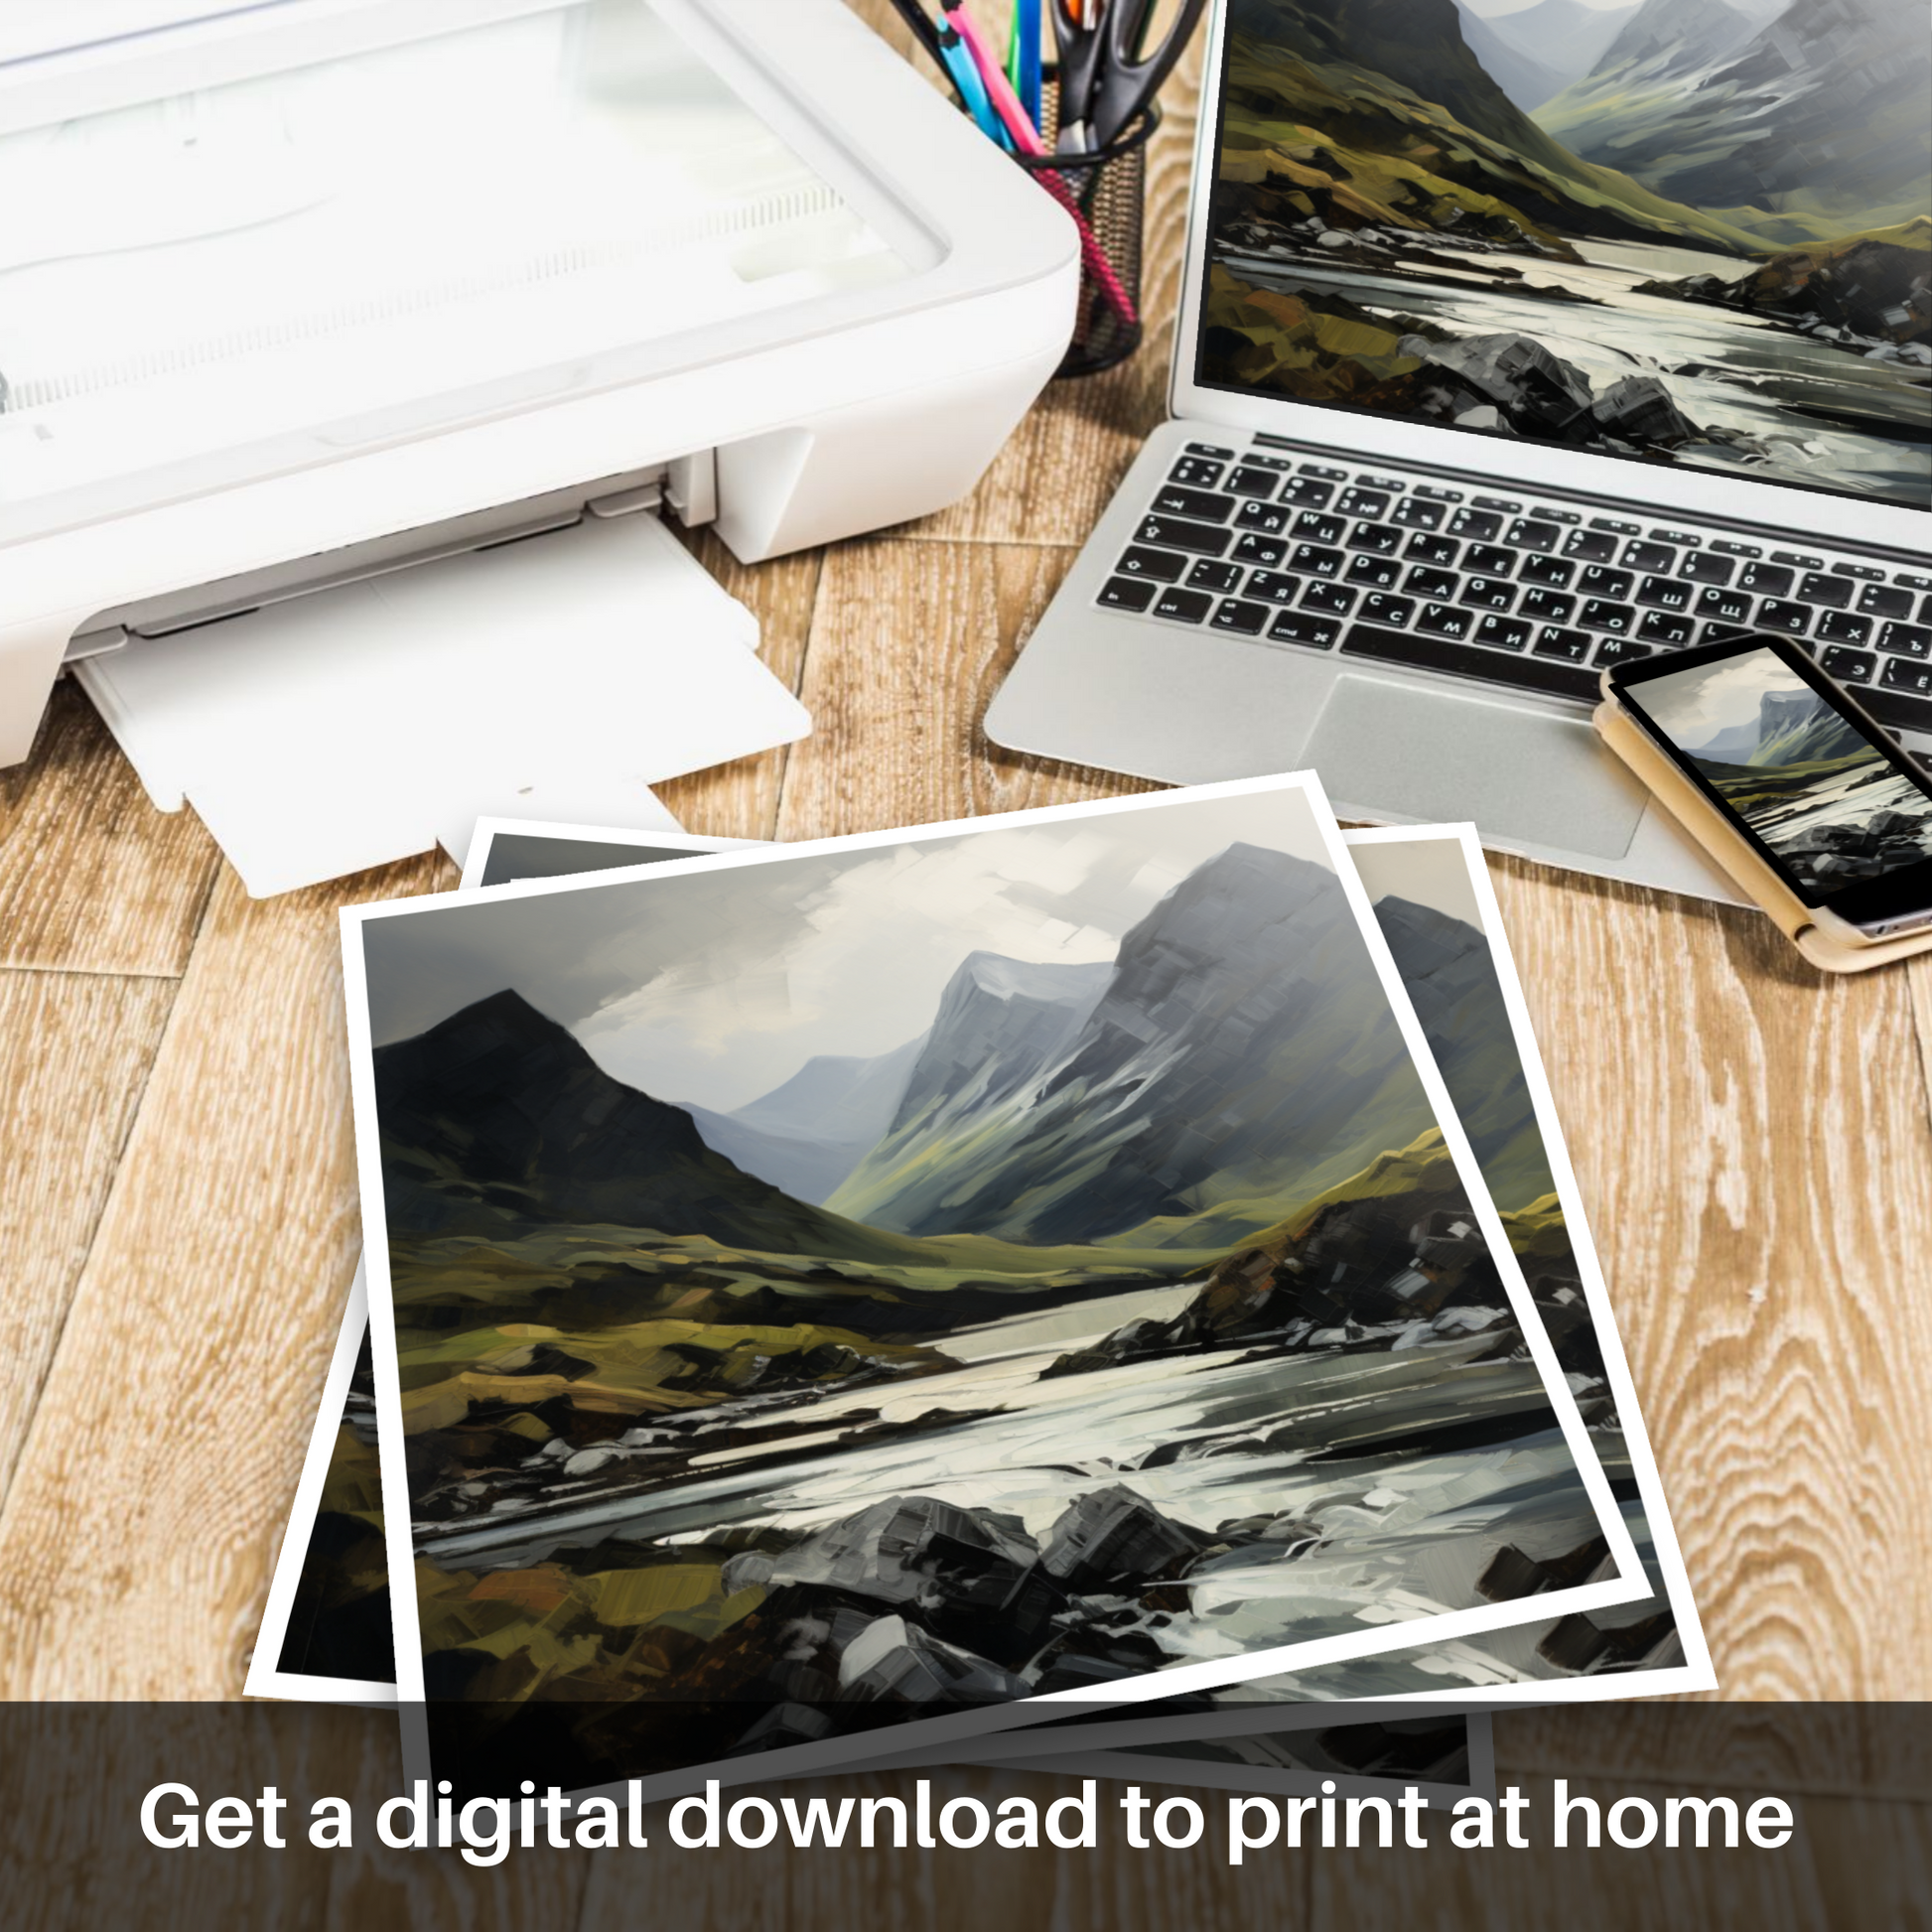 Downloadable and printable picture of Liathach, Wester Ross